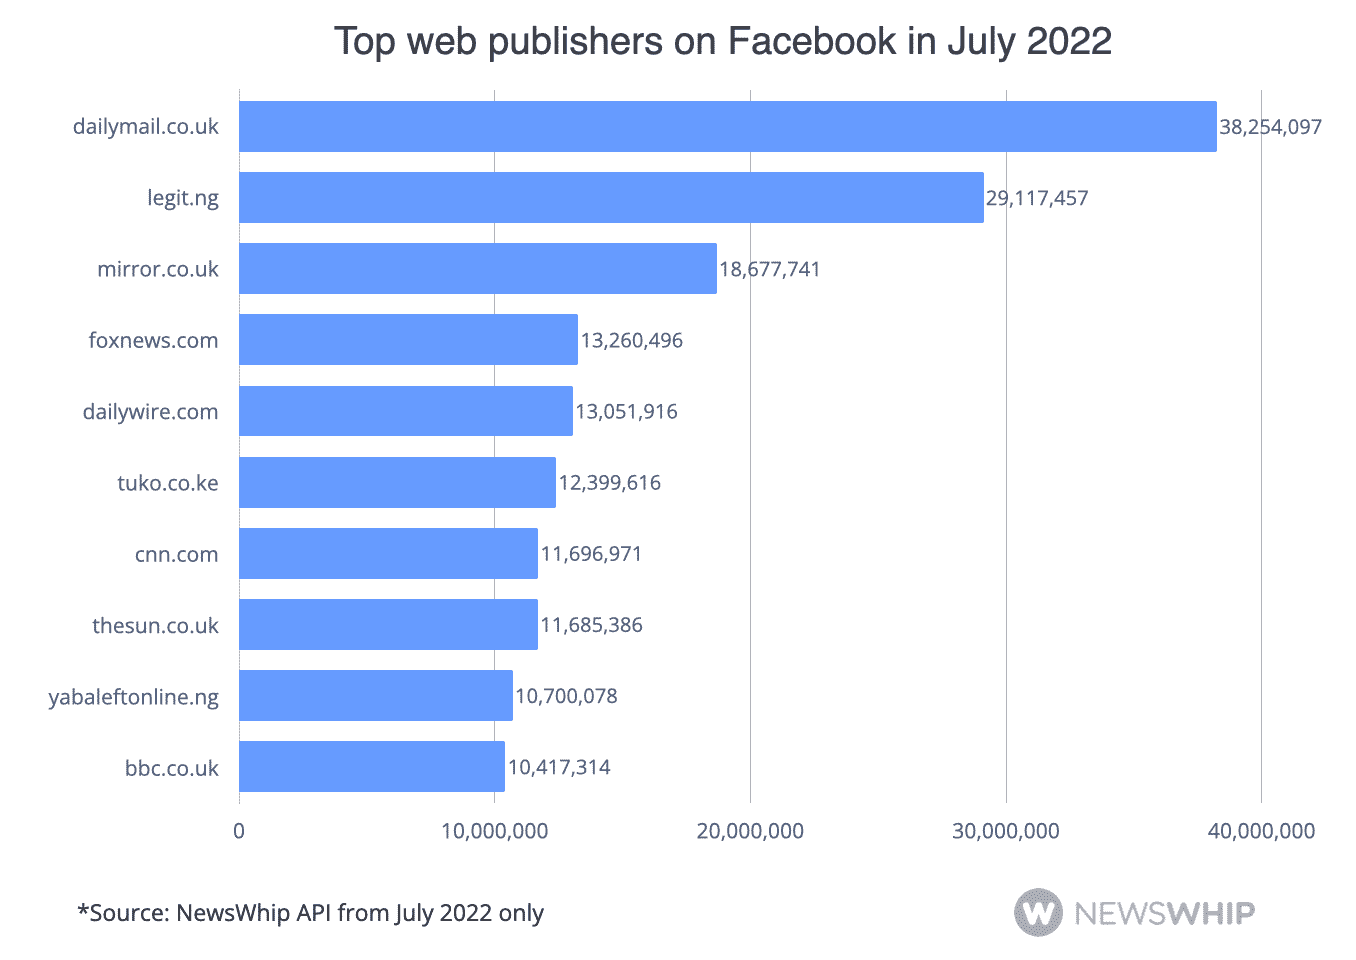 Graph showing the top publishers on Facebook in July 2022, ranked by engagement